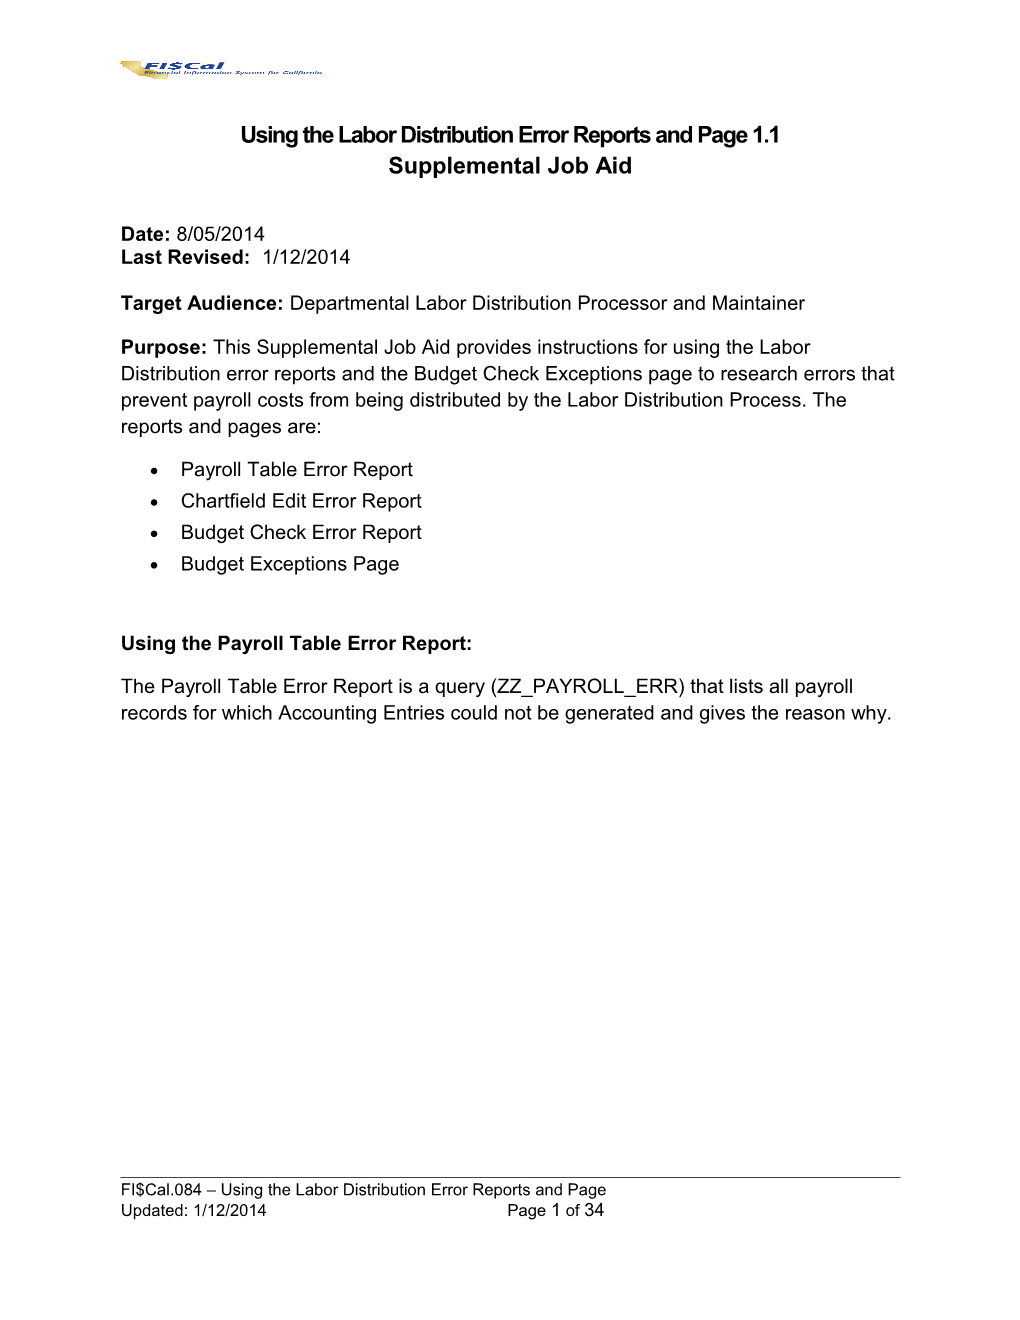 Using the Labor Distribution Error Reports and Page 1.1 Supplemental Job Aid